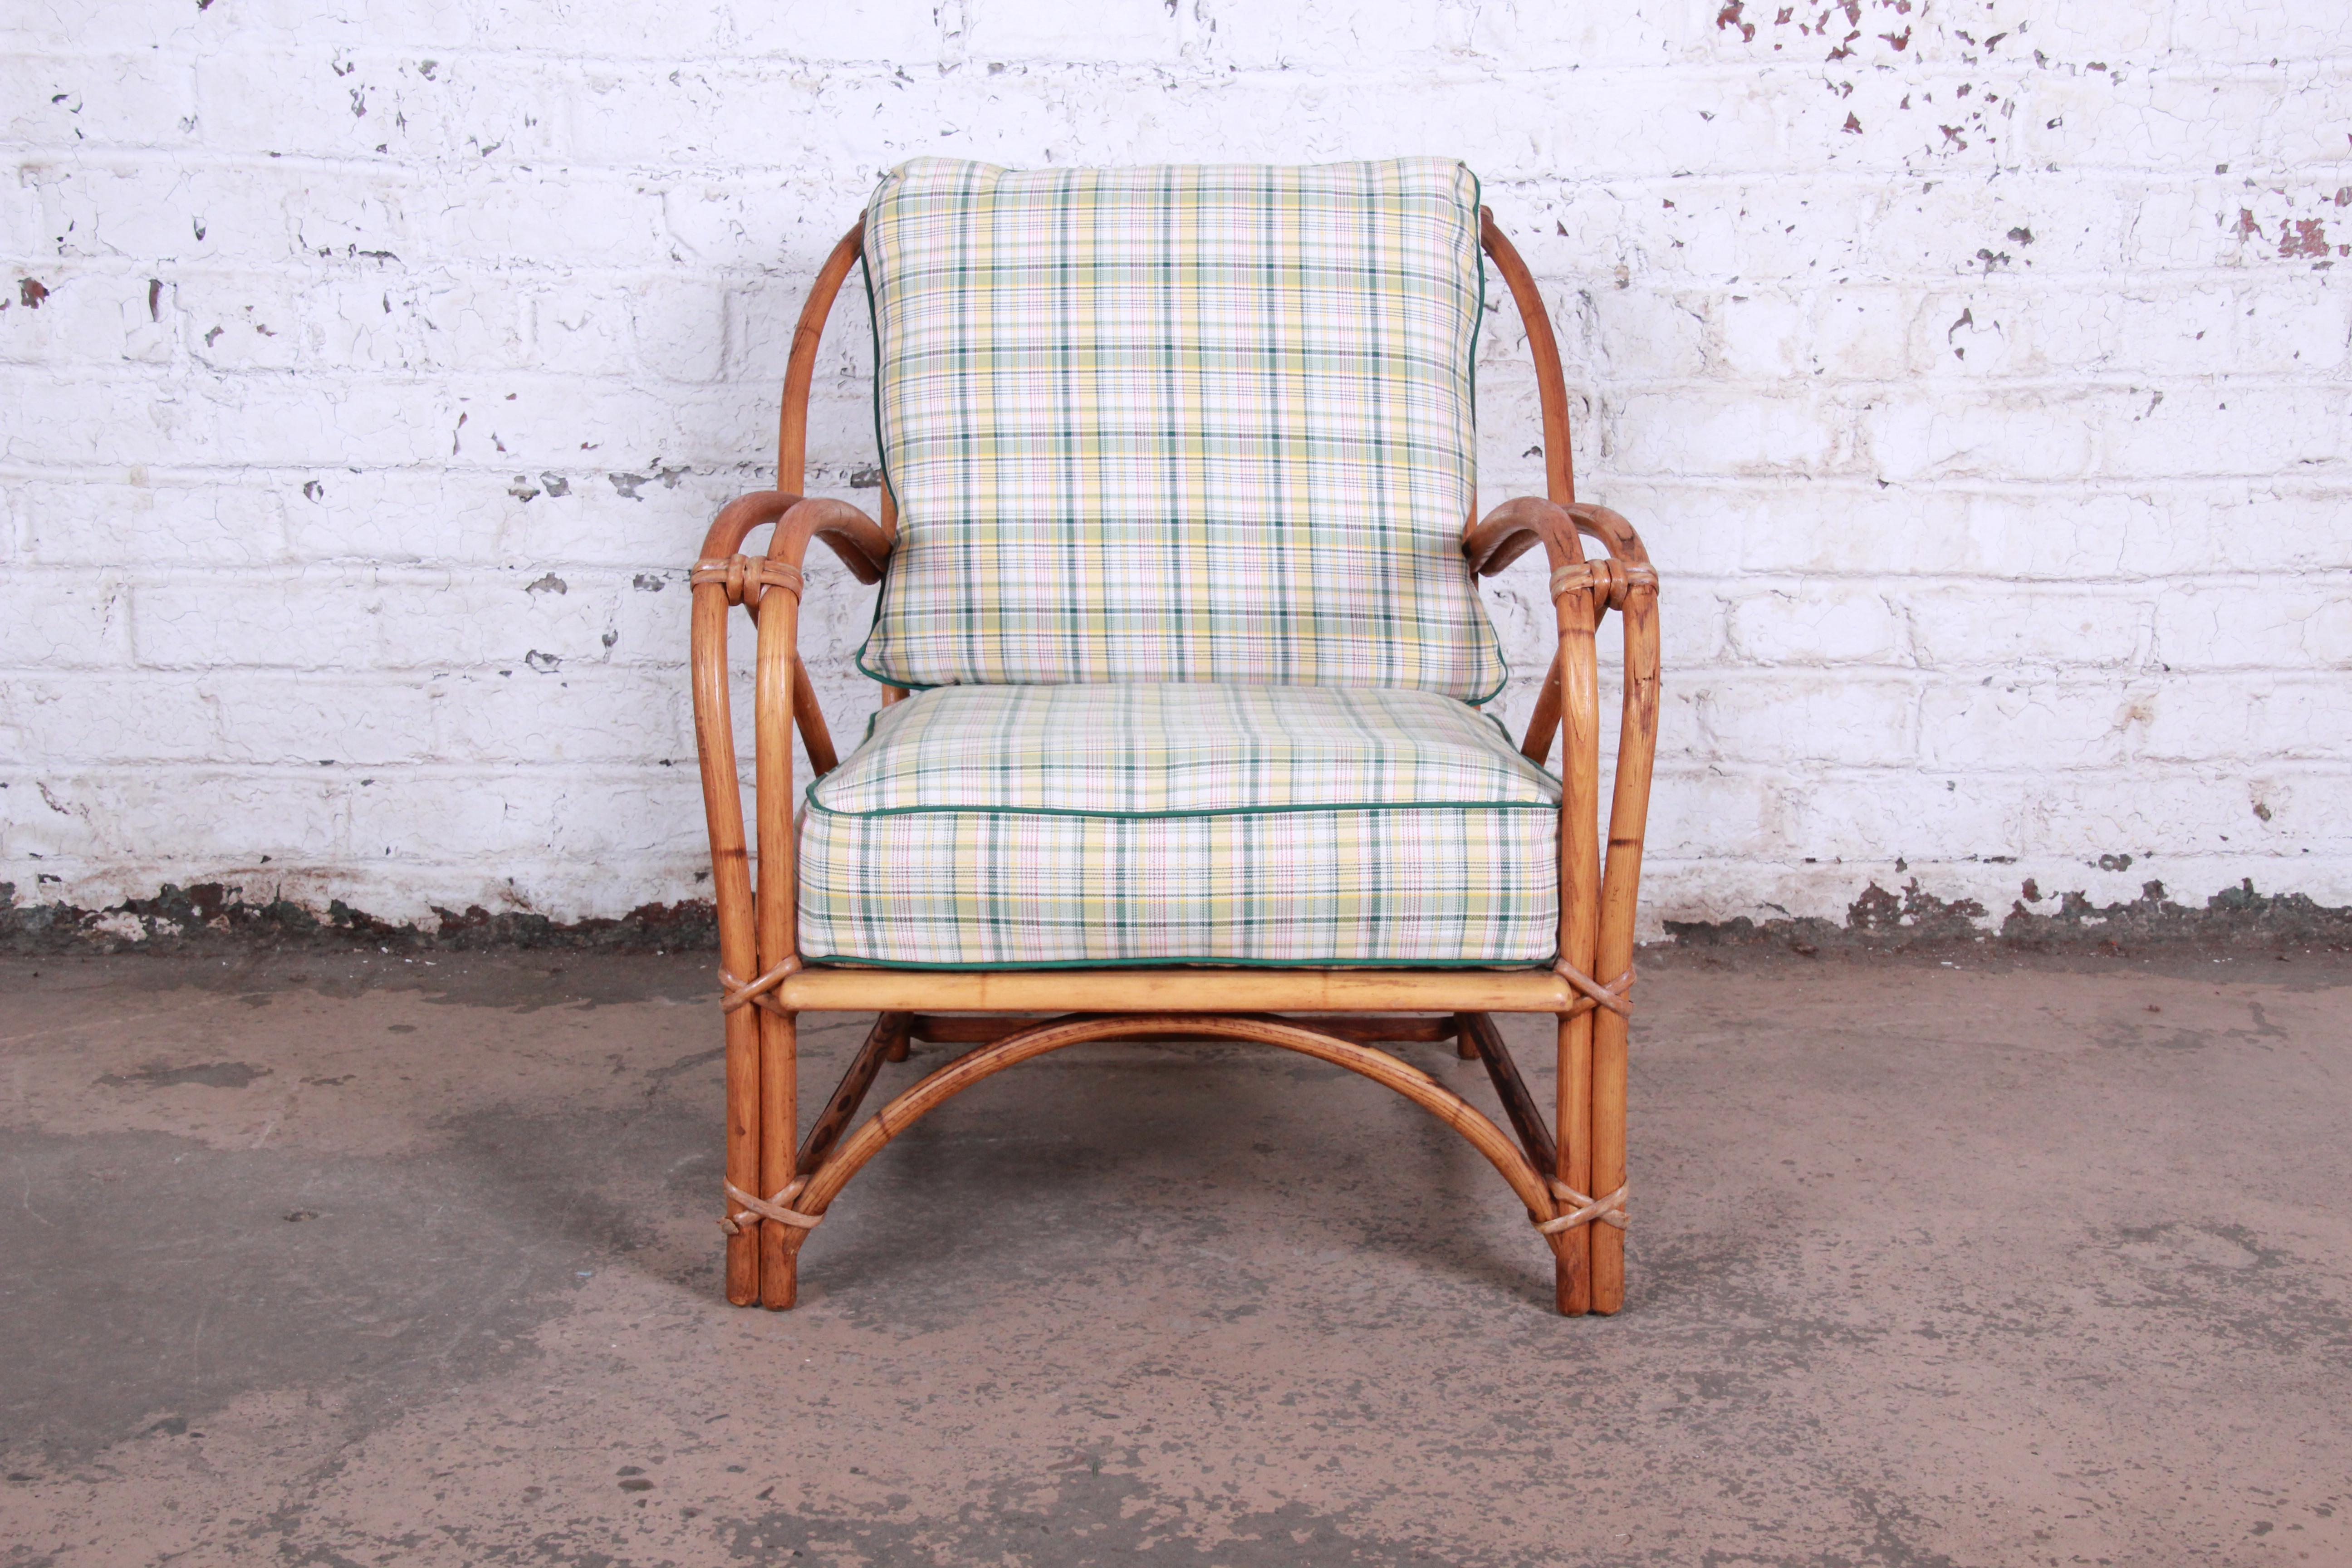 A beautiful Mid-Century Modern Hollywood Regency lounge chair from the Ashcraft line by Heywood-Wakefield. The chair features a gorgeous bent rattan frame, and the original plaid upholstery in green, red, yellow, and white. The frame has clean